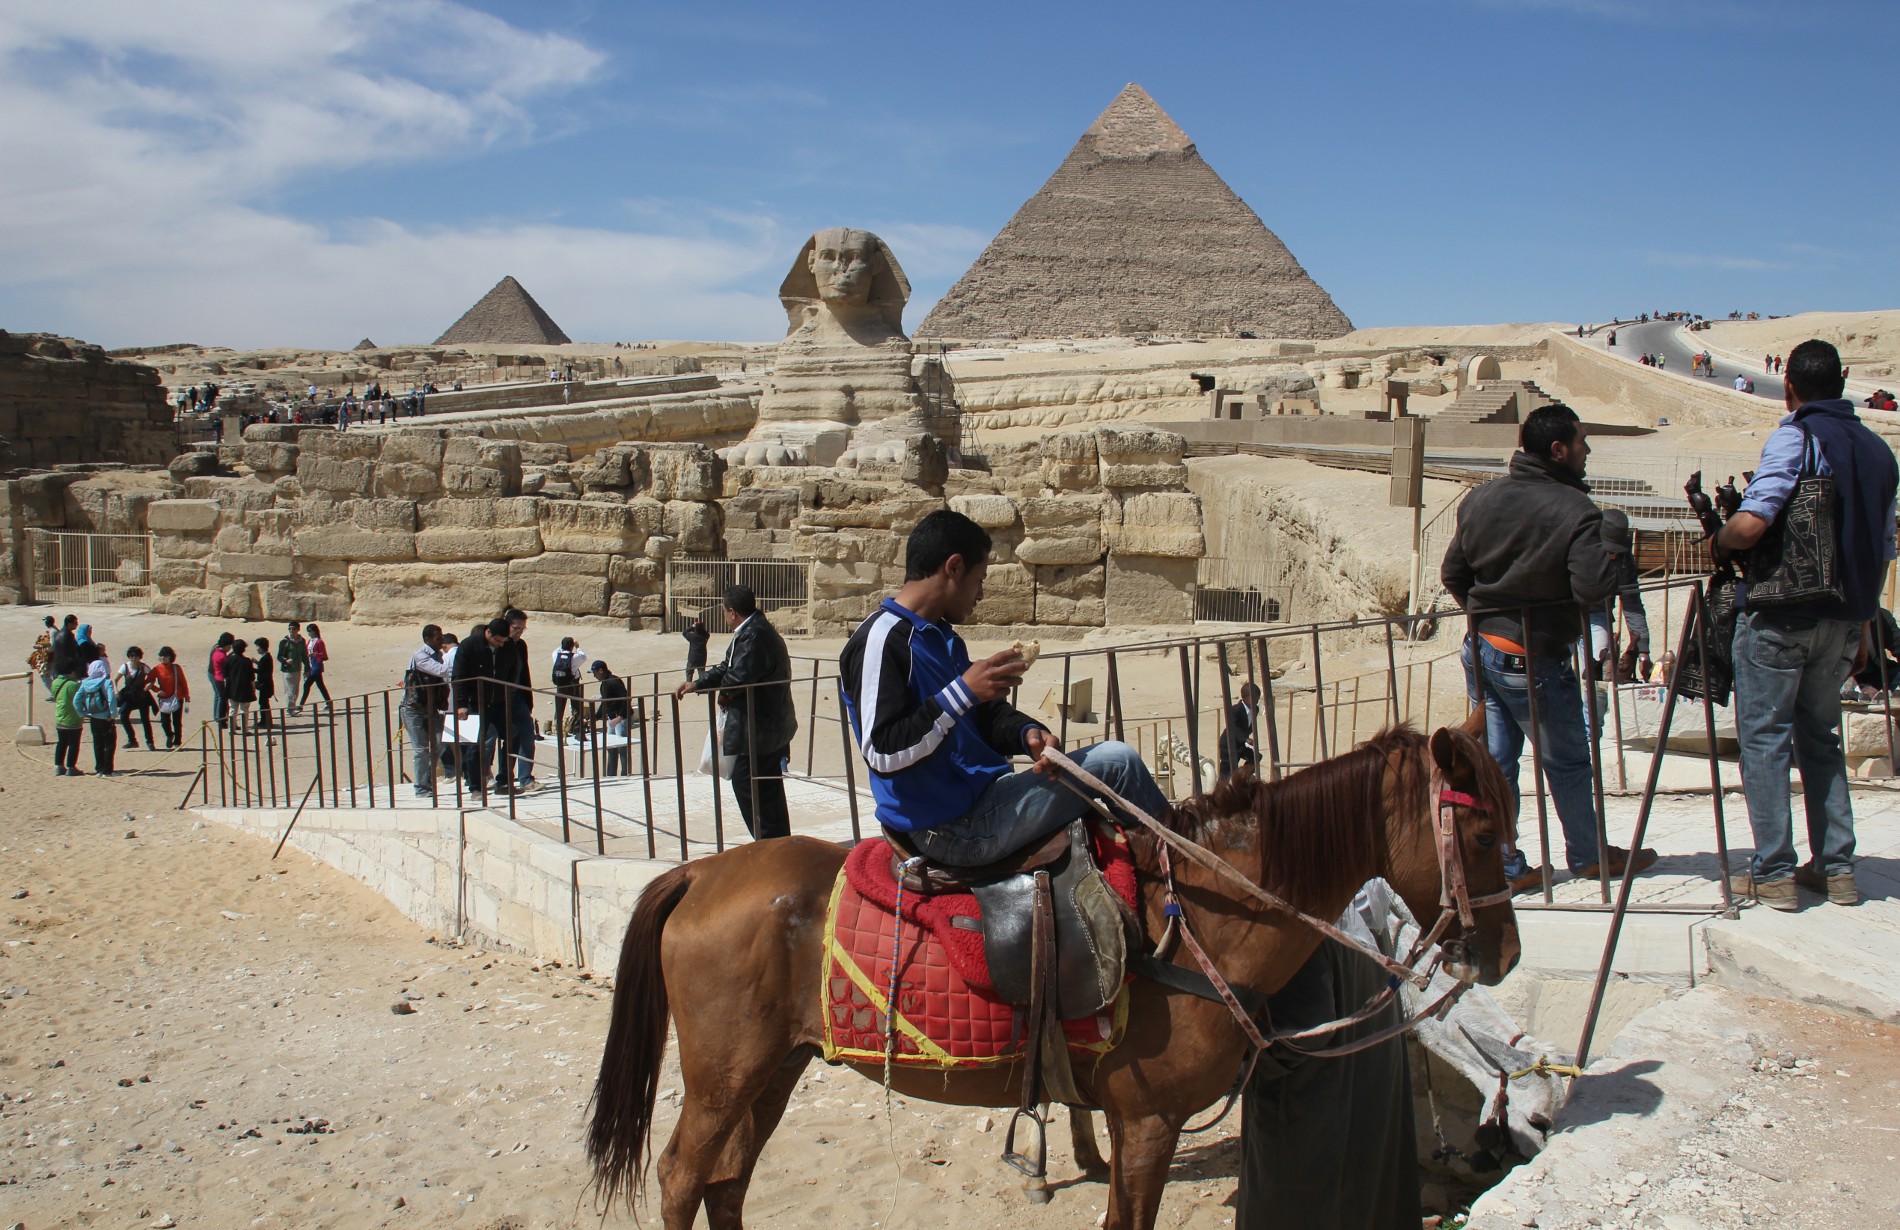 A man renting a horse waits for tourists in front of the Sphinx, the Chephren Pyramid, and the Mycerinus Pyramid.